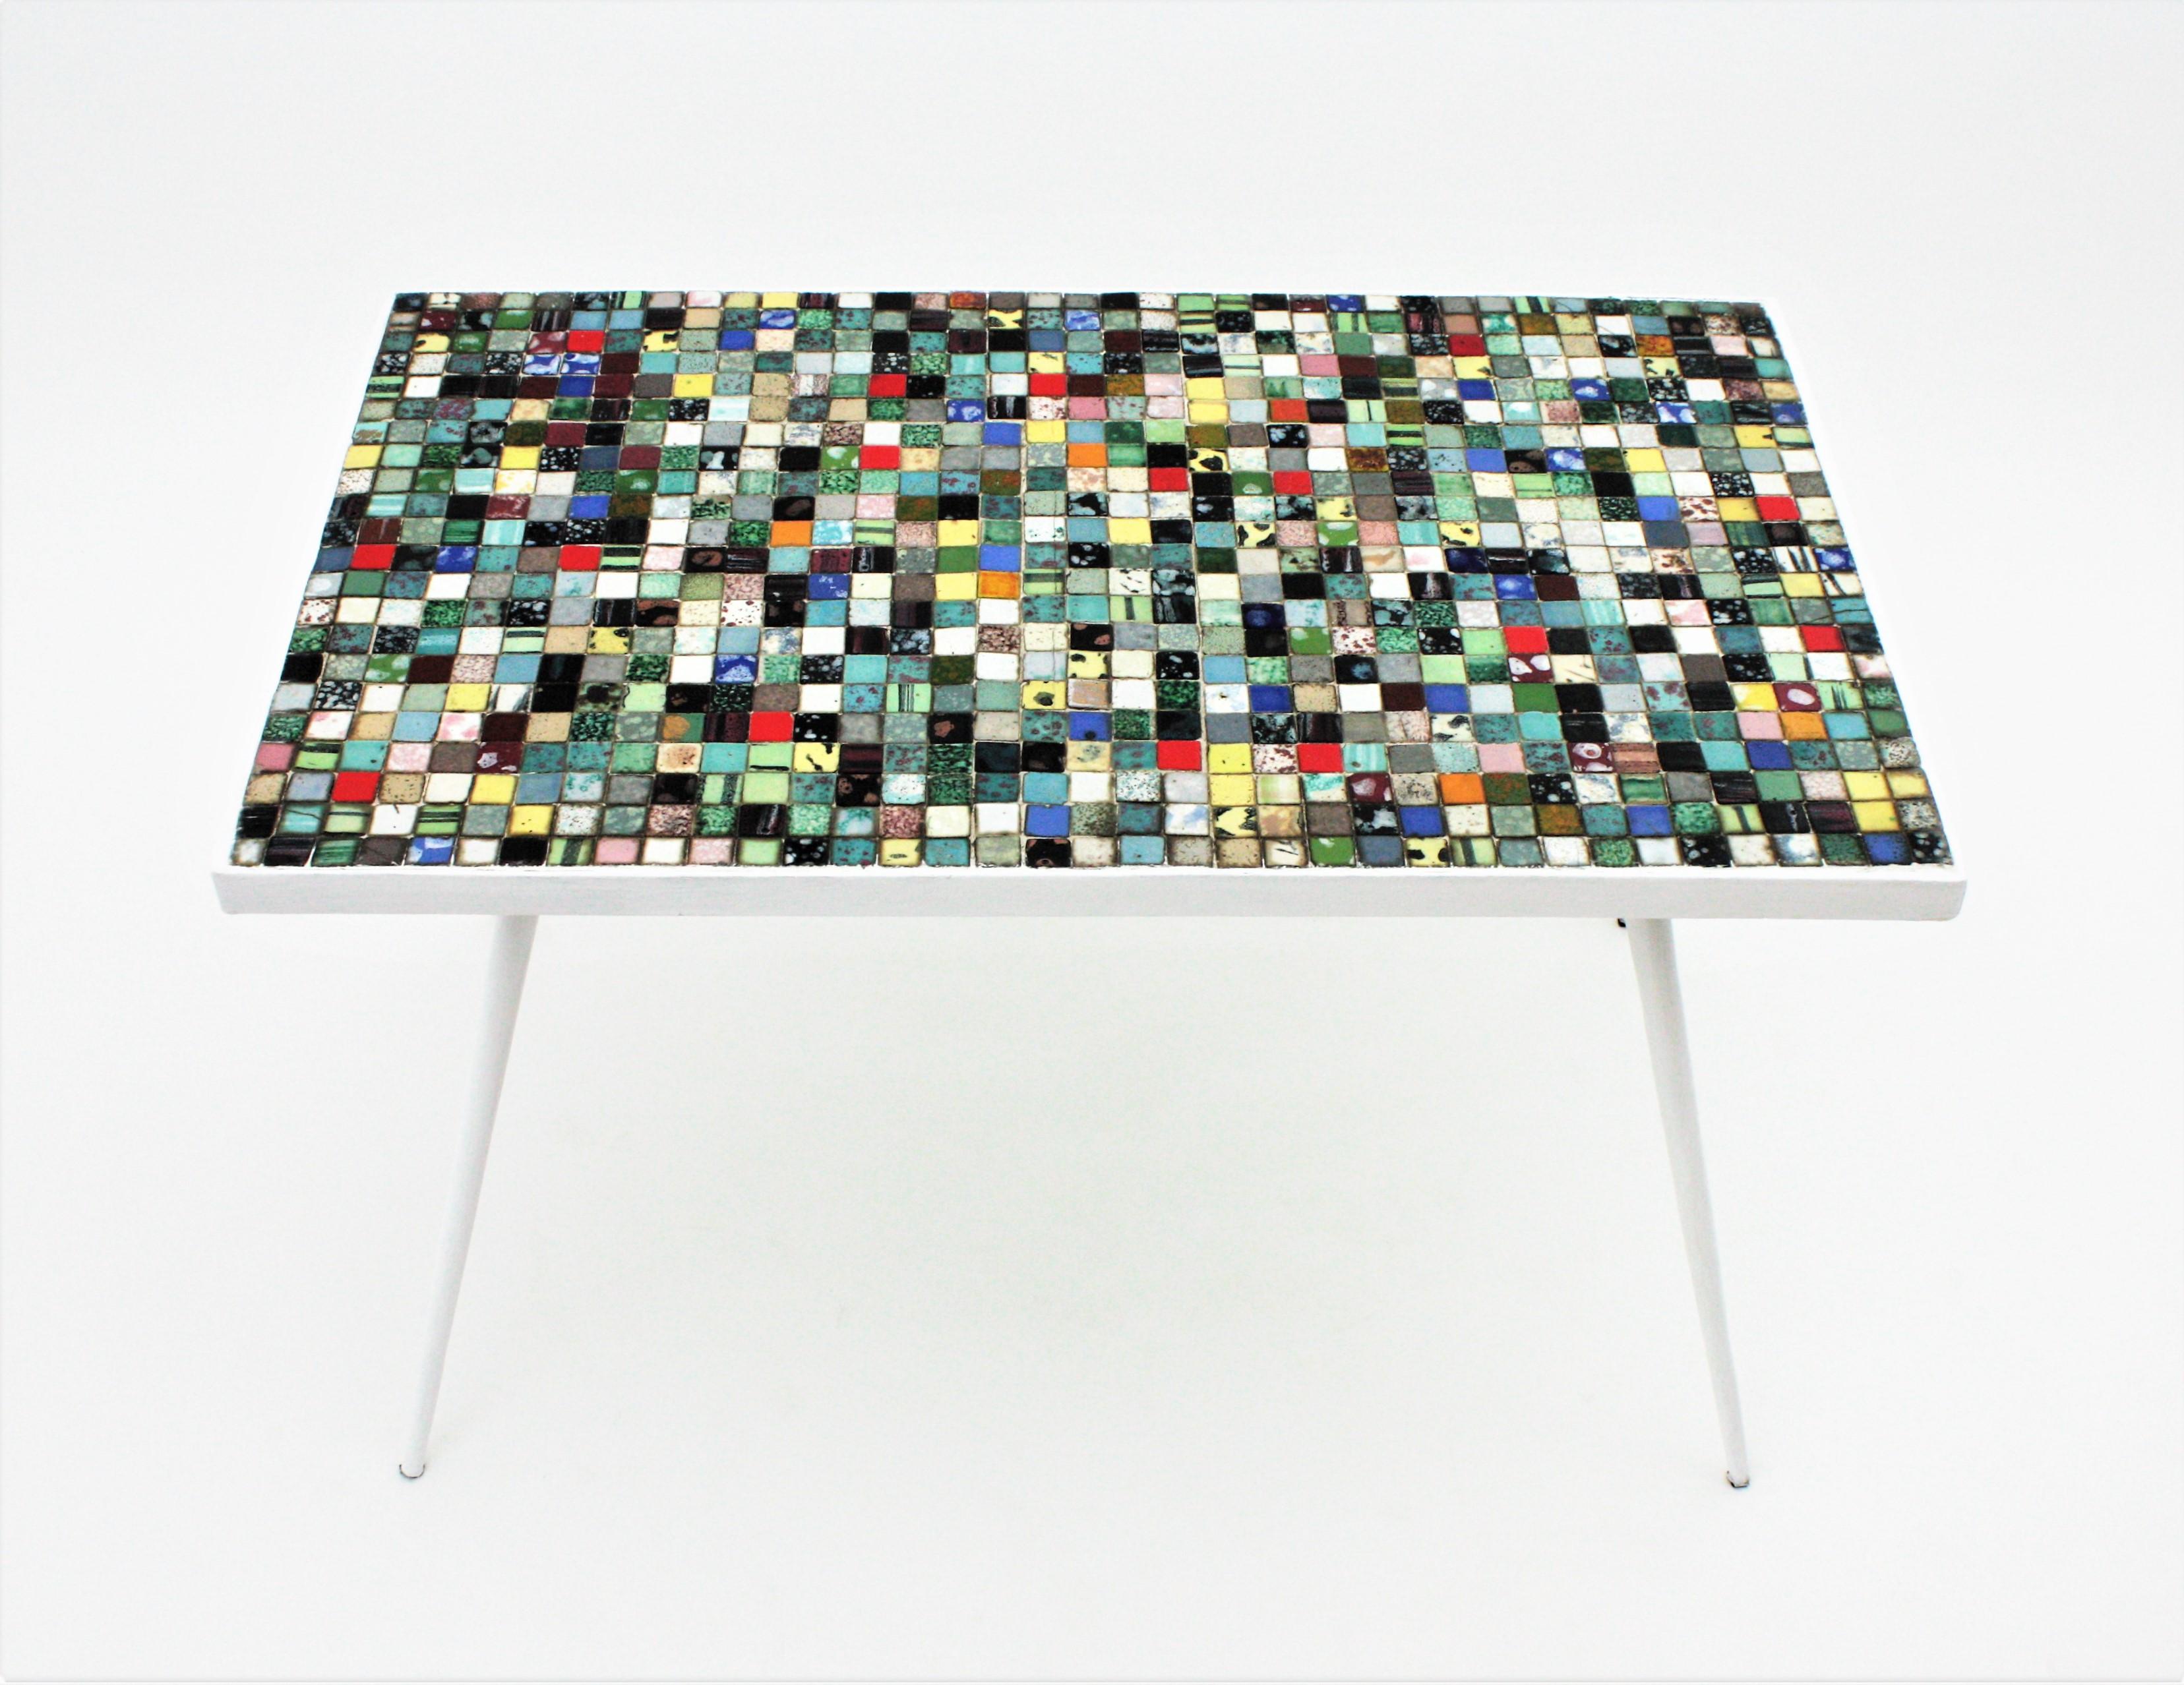 Beautiful Mid-Century Modern table with ceramic mosaic tile top and iron base. Spain, 1950s
This coffee / cocktails table or end table features a ceramic grid mosaic with tiles in different colors standing on a four footed iron base painted in white